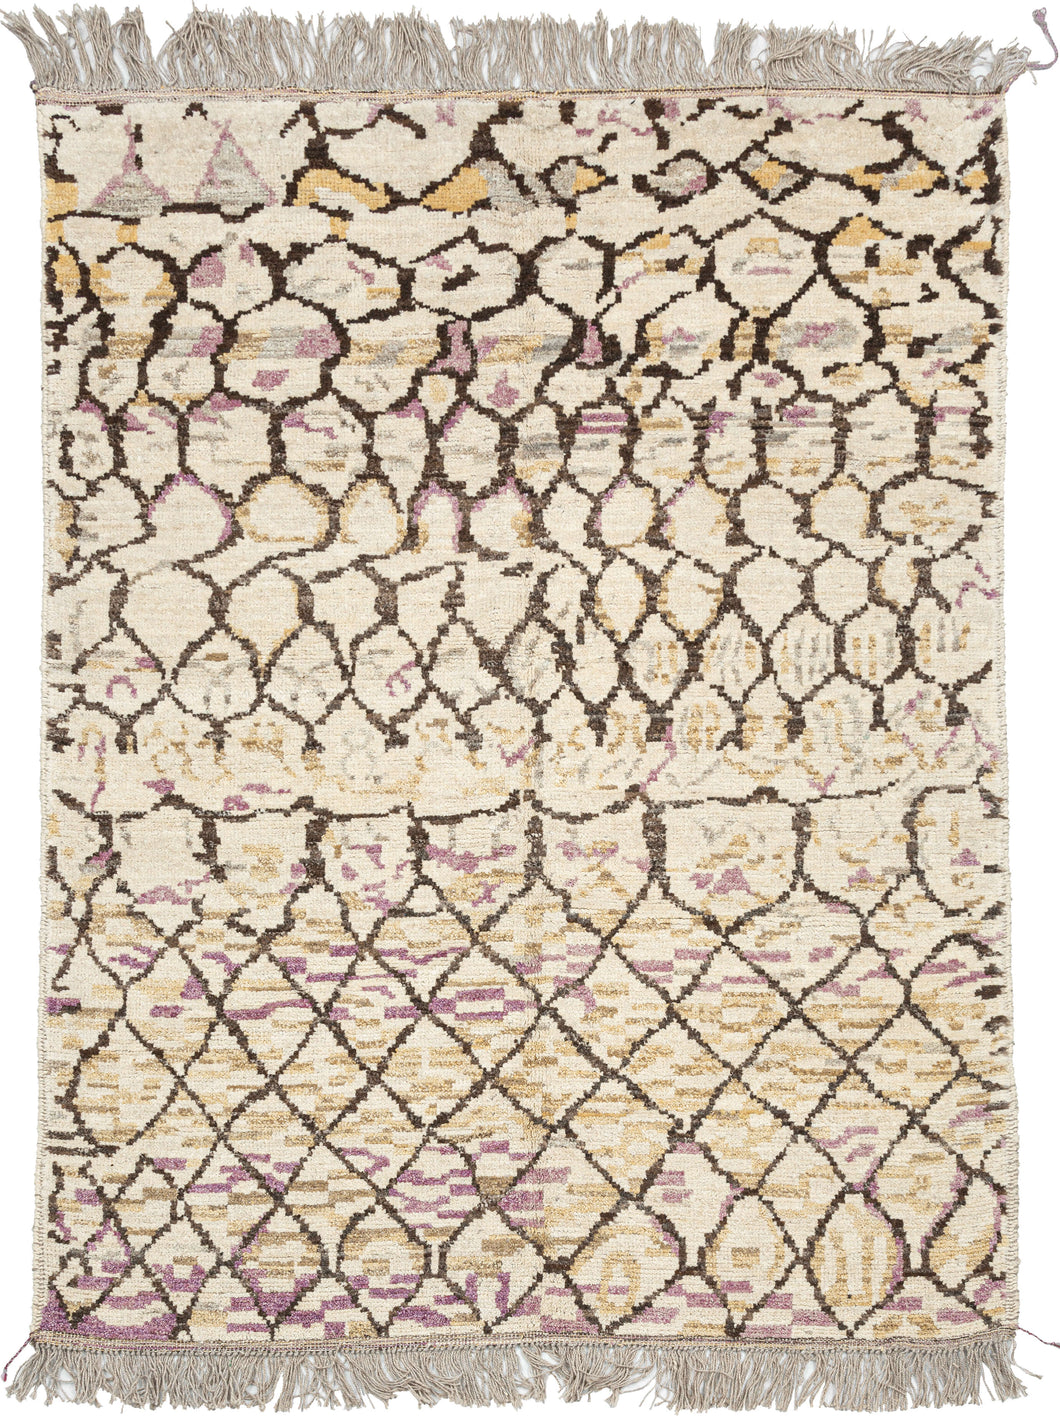 This Contemporary Afghan Moroccan-Style Rug features an idiosyncratic lattice pattern over color blocks of lavendar and wheat on an ivory ground.  Woven of hearty, hand-spun Afghan wool giving it durability and extra heft not commonly found in the Moroccan weaving usually associated with this patterning. 